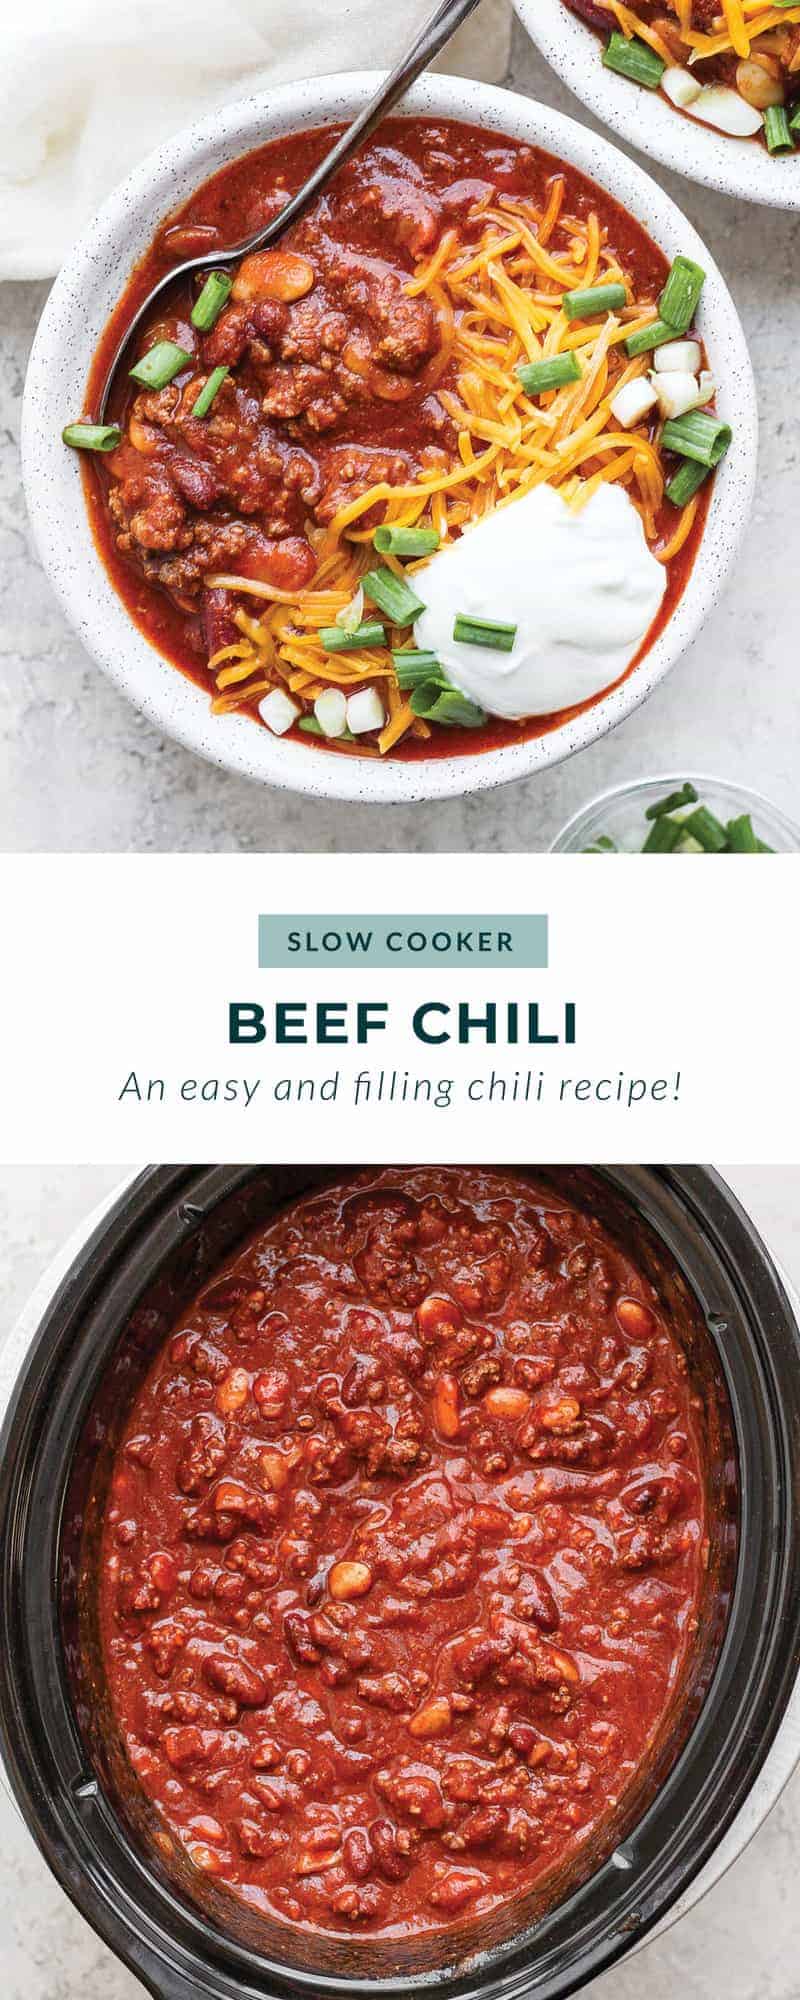 Slow Cooker Chili (Warm & Cozy!) - Fit Foodie Finds